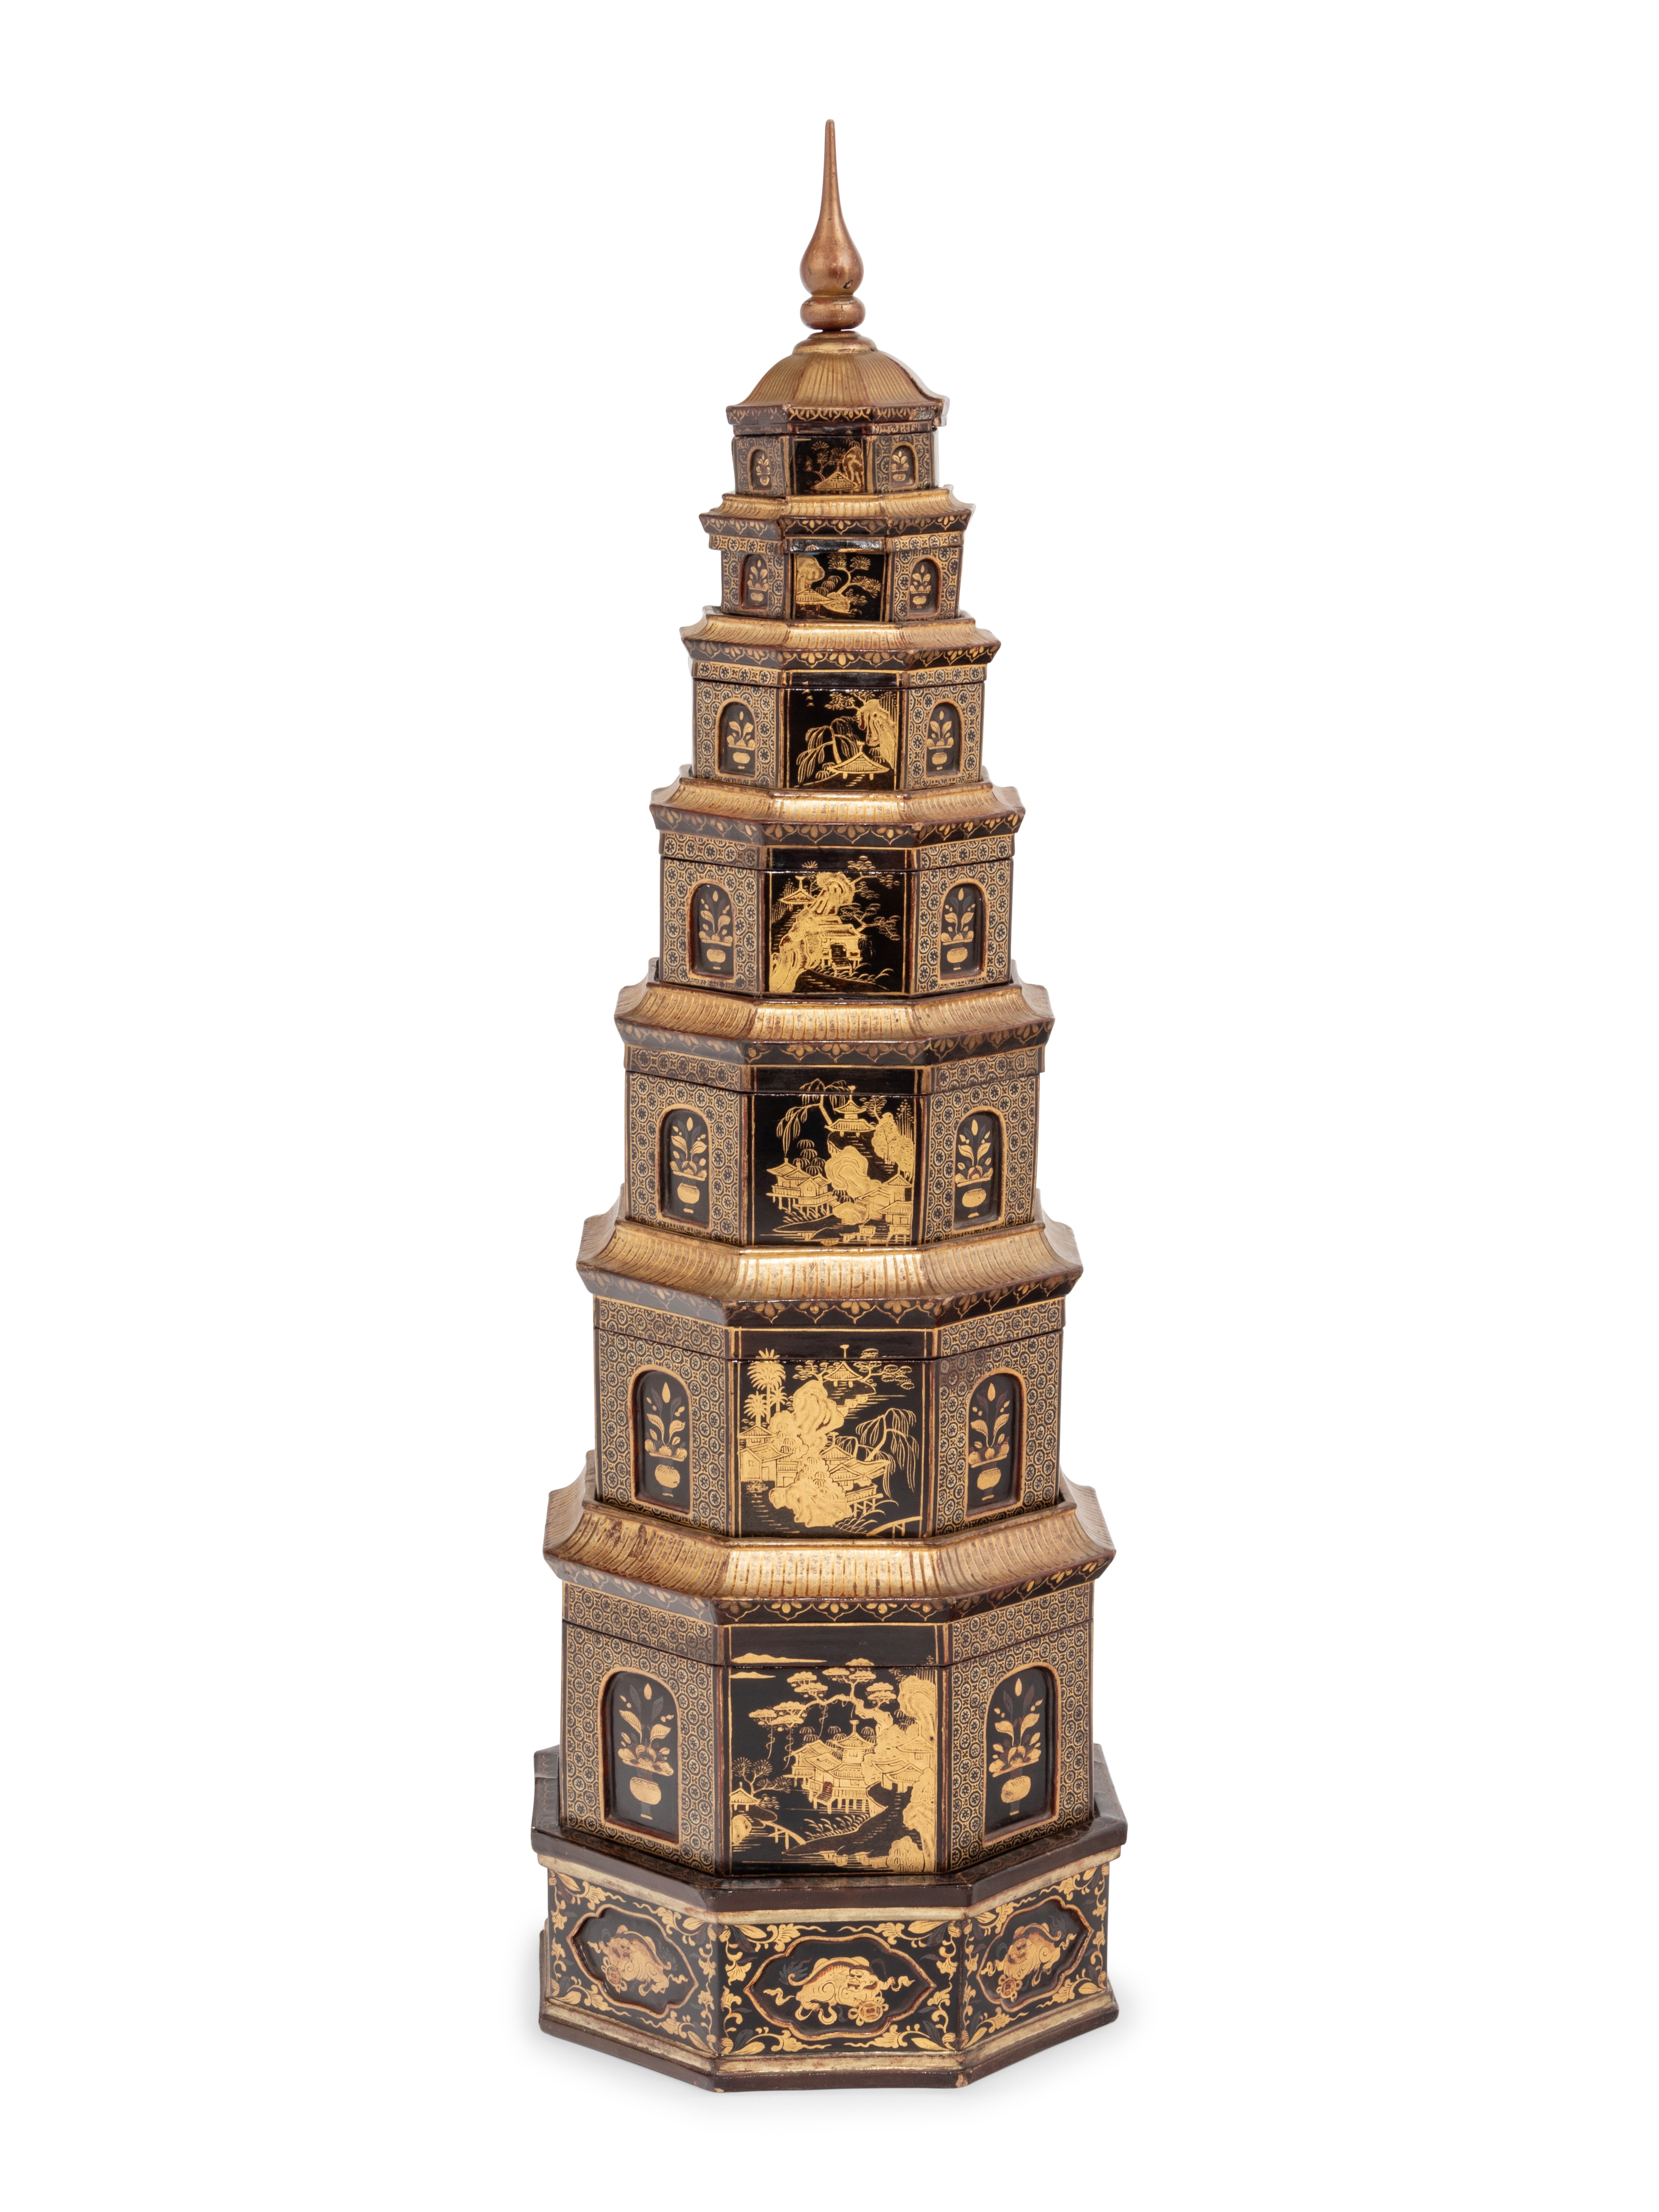 A Chinese Export Black and Gilt Lacquer Pagoda-Form Stacking Container - Image 2 of 9